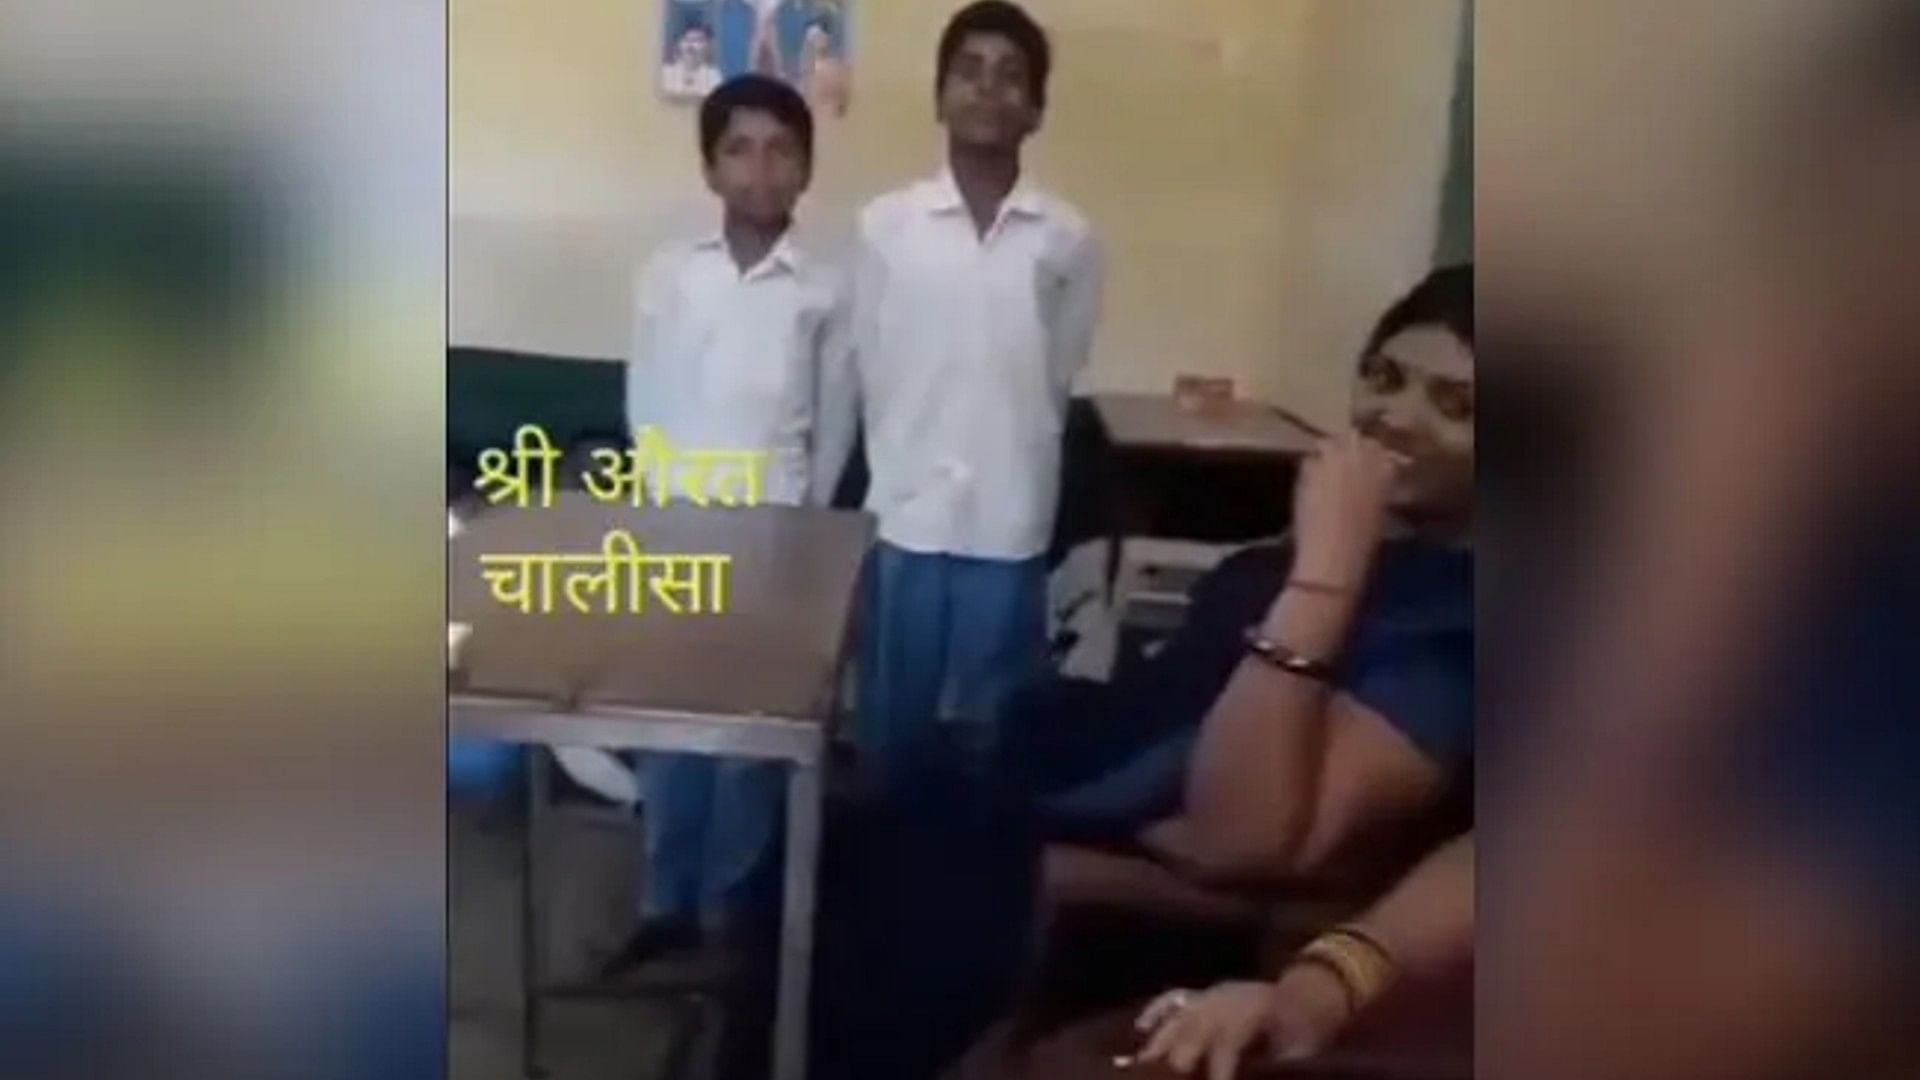 Students sang 'Aurat Chalisa' in front of the teacher in class video viral on social media